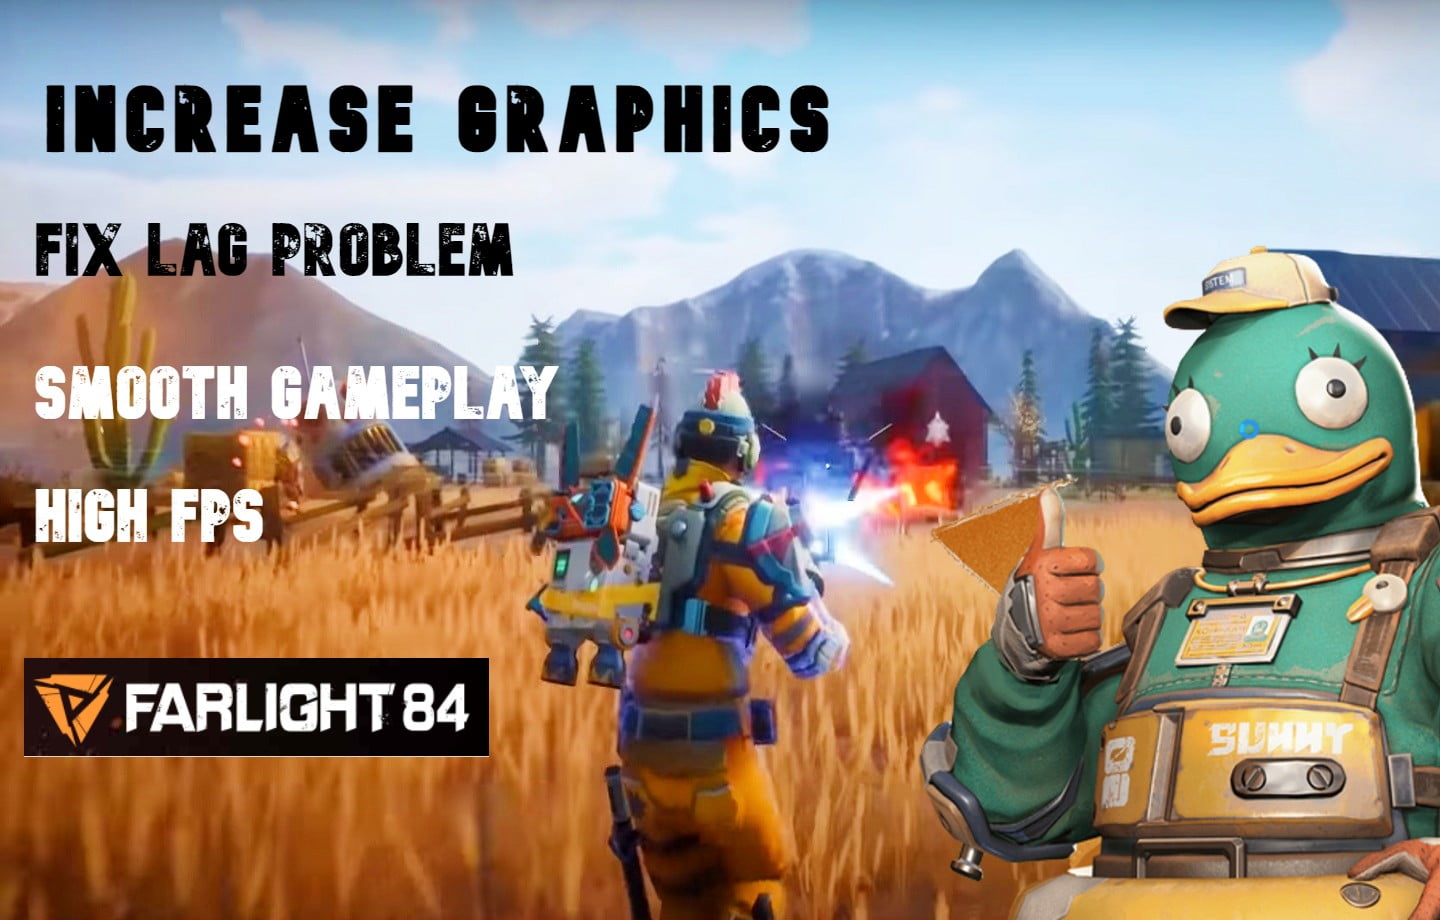 You are currently viewing How to increase graphics in farlight 84, Fix lag problem